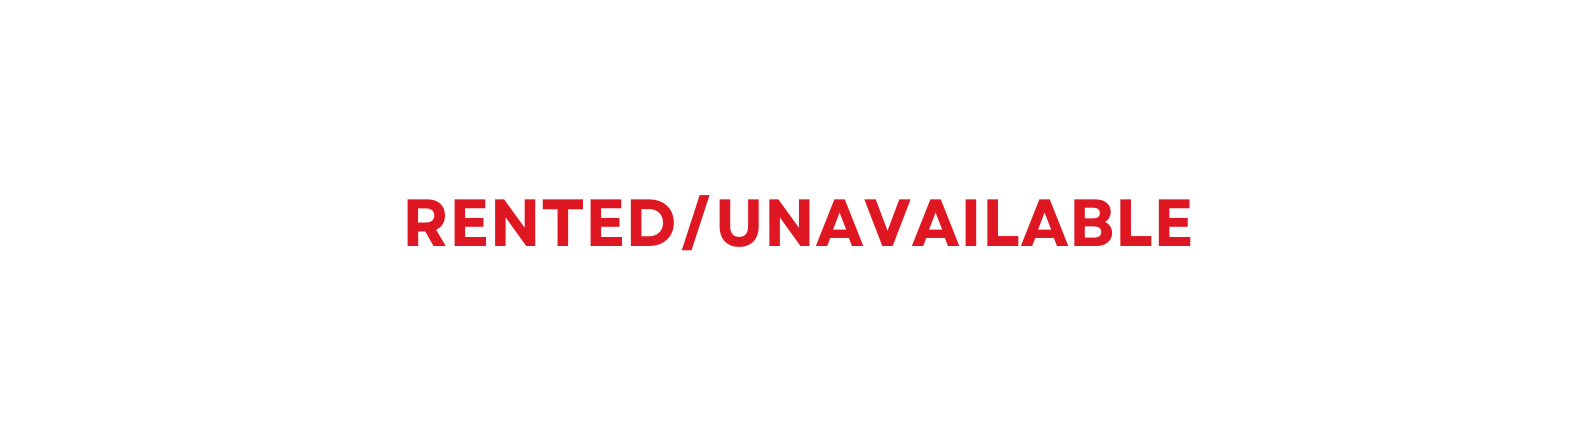 RENTED UNAVAILABLE